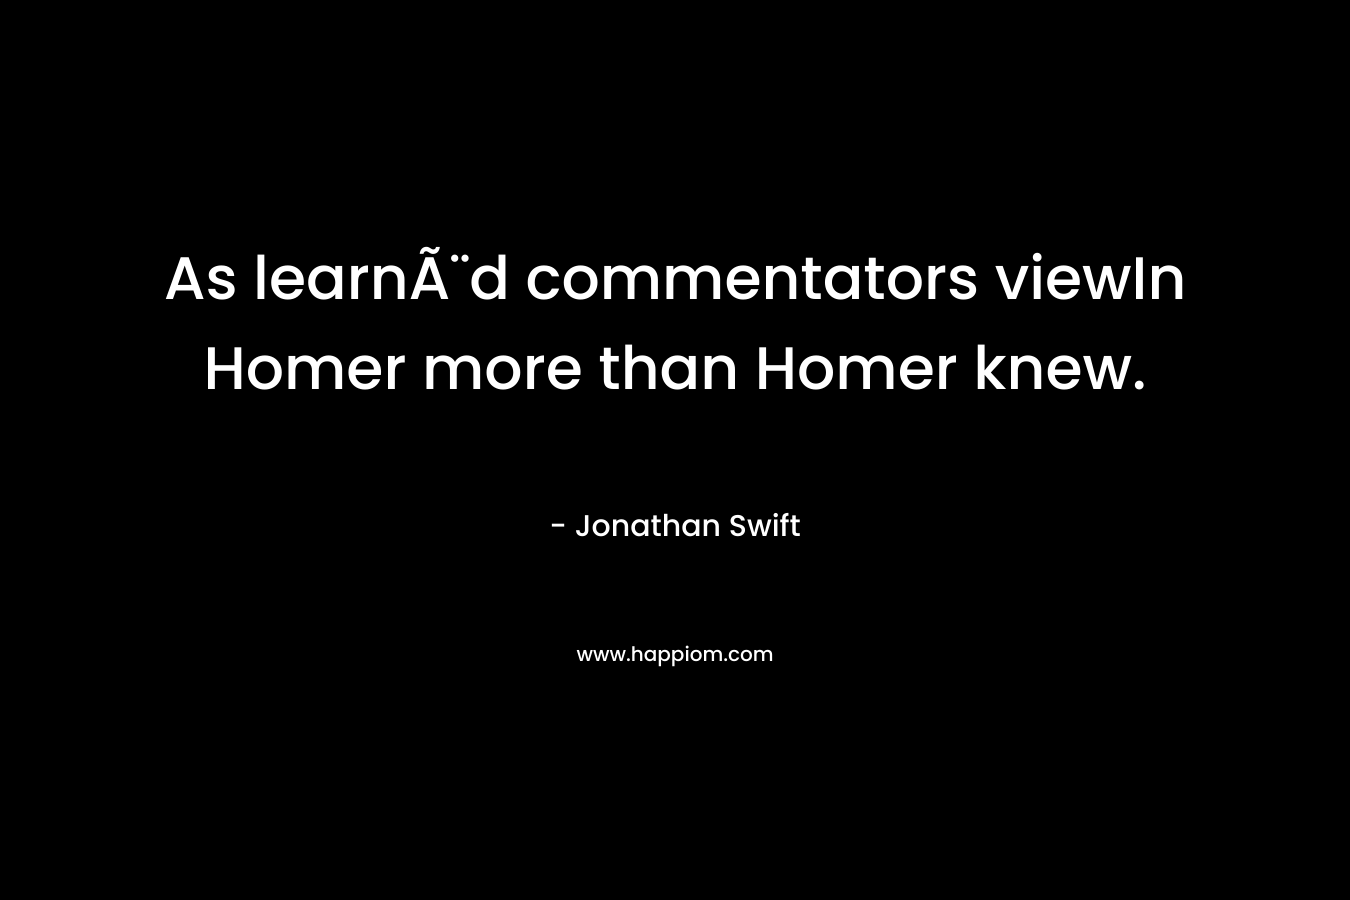 As learnÃ¨d commentators viewIn Homer more than Homer knew.